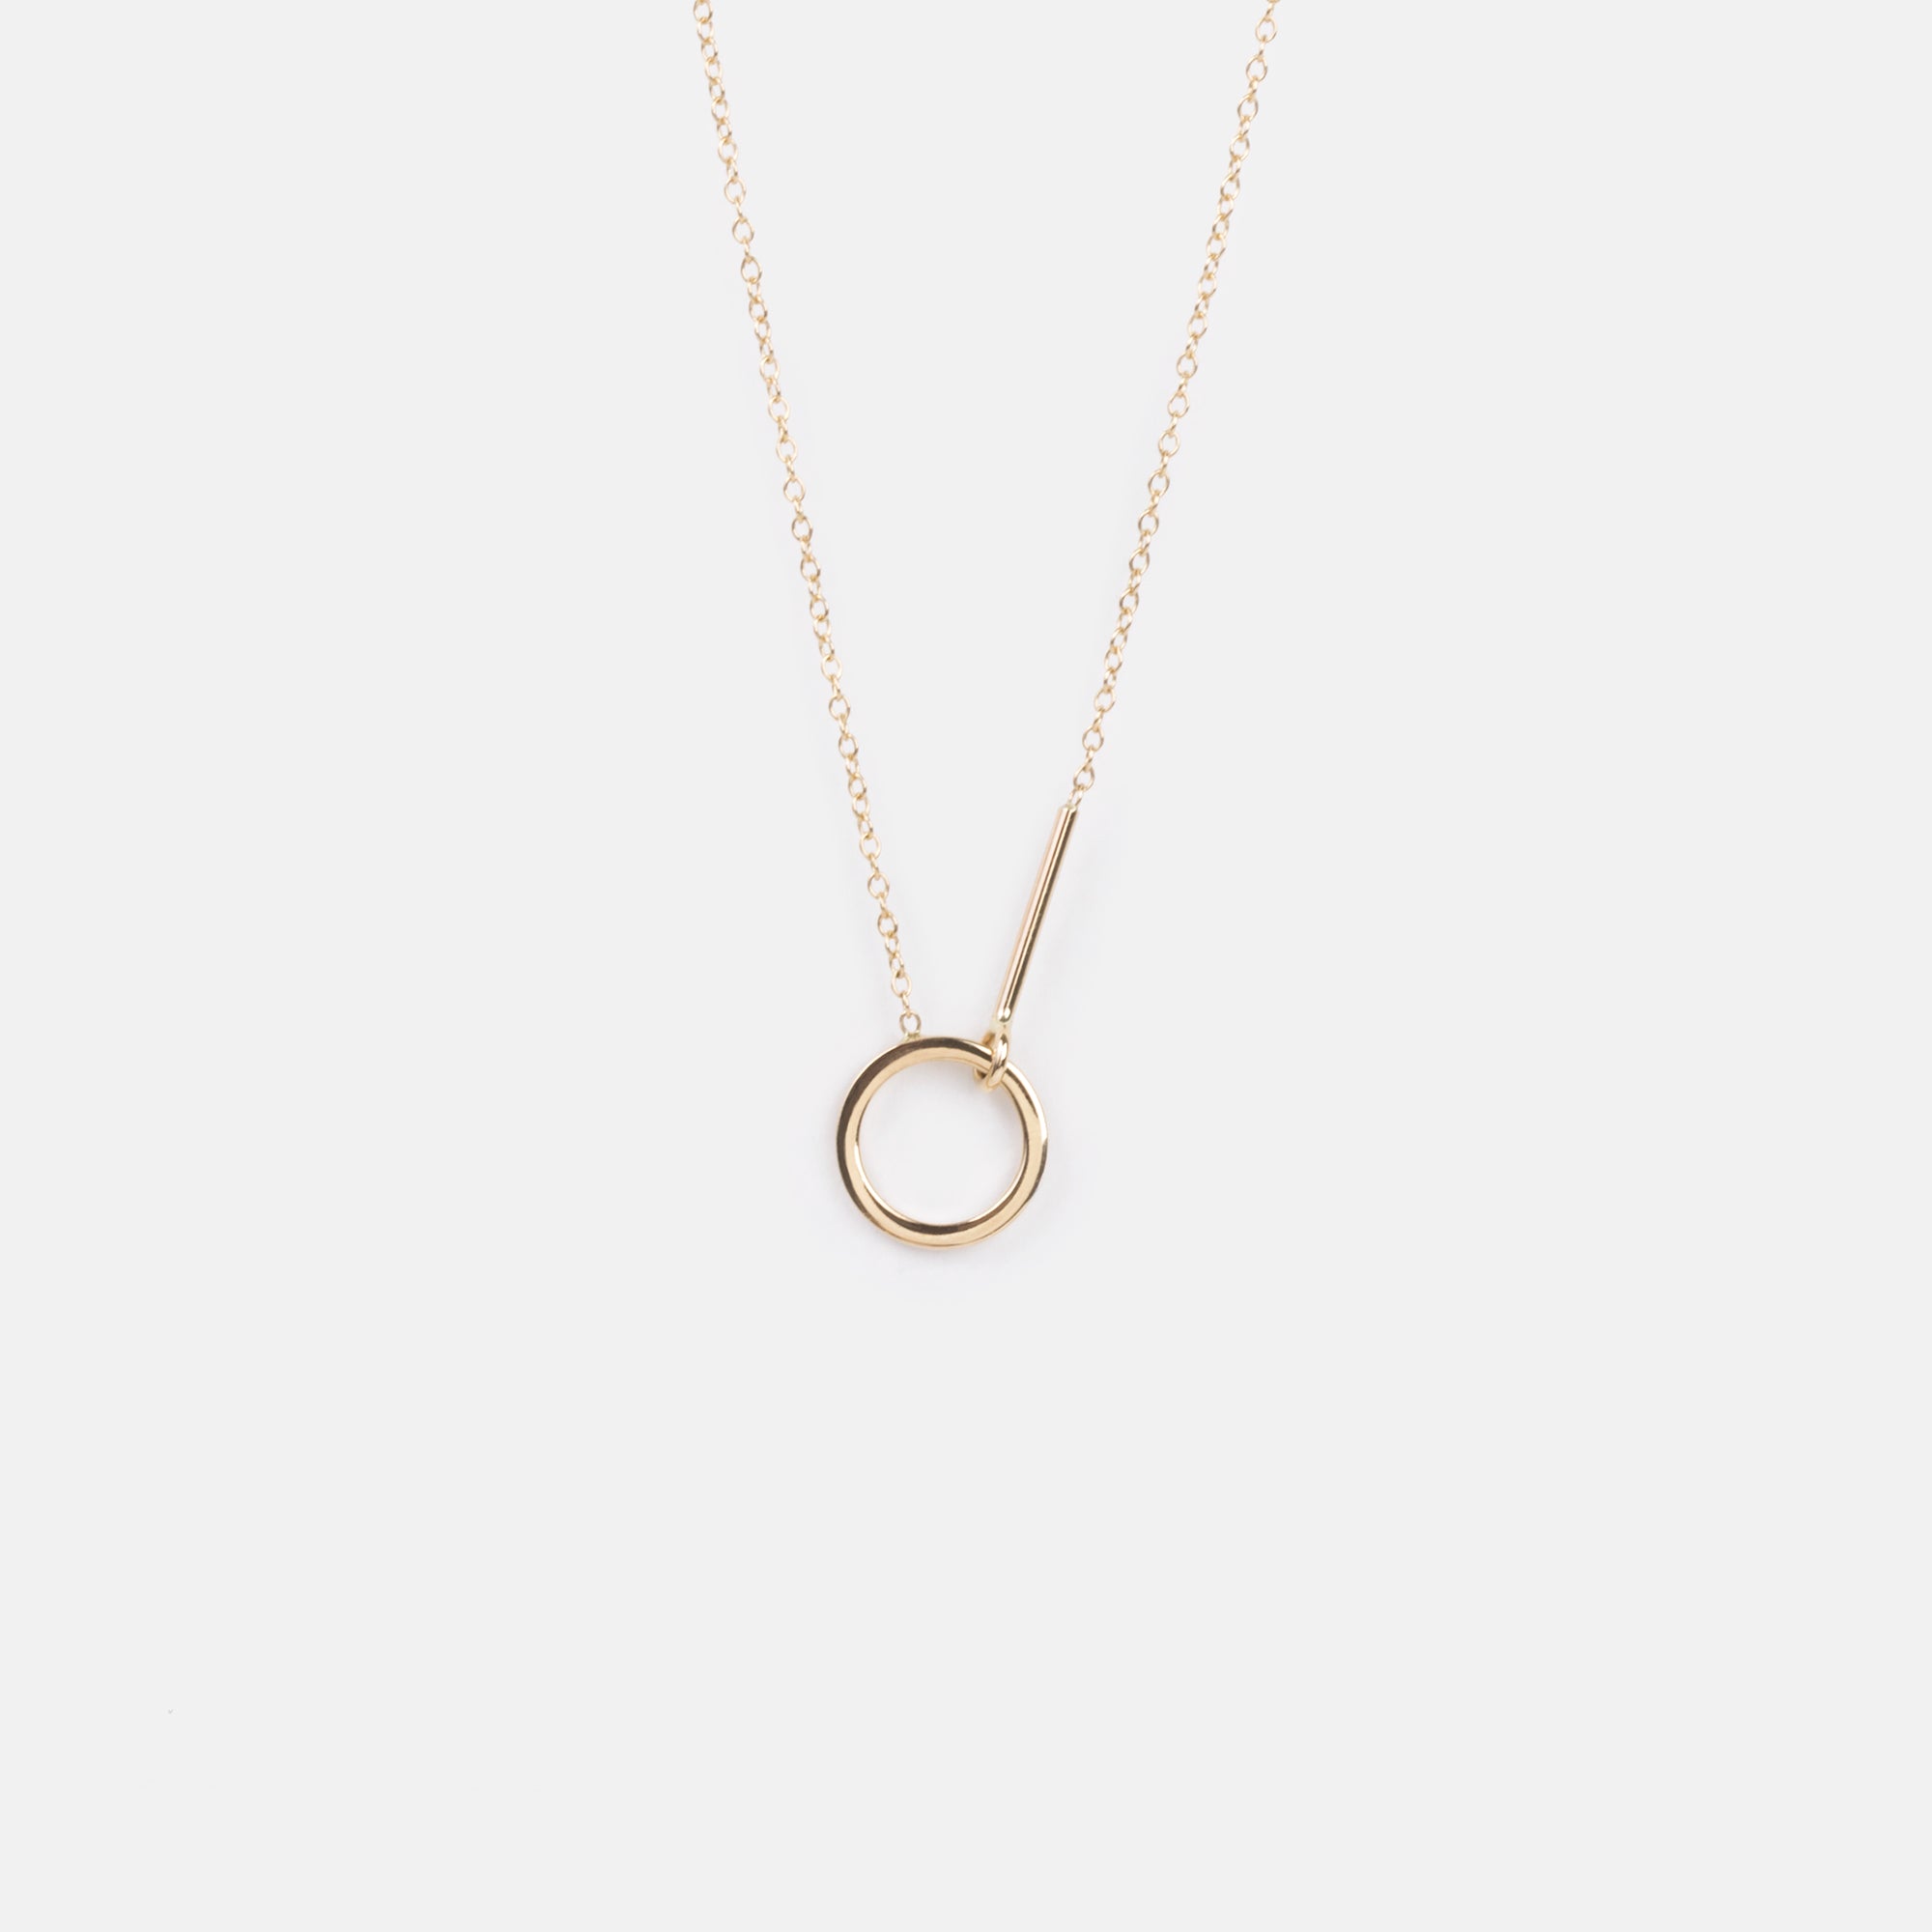 Visata Designer Necklace in 14k Gold By SHW Fine Jewelry NYC